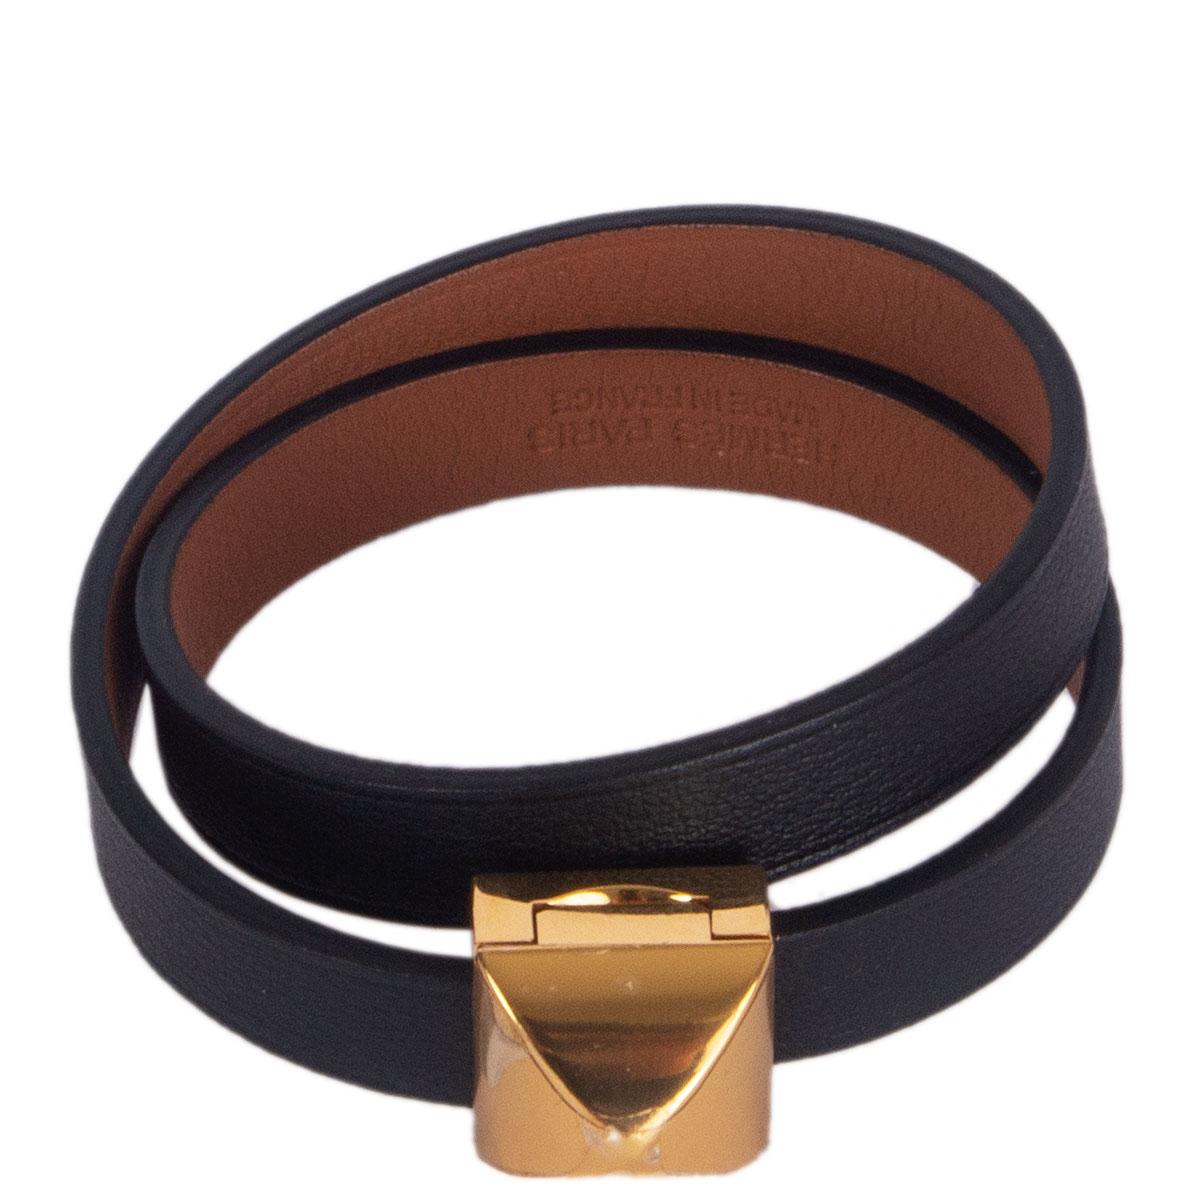 100% authentic Hermes 'Medor Infini Double Tour' in black and Gold (camel) Swift calfskin featuring gold plated hardware. Brand new. Comes with box.

Measurements
Tag Size	T1
Width	0.9cm (0.4in)
Length	32cm (12.5in)
Hardware	Gold Plated

All our